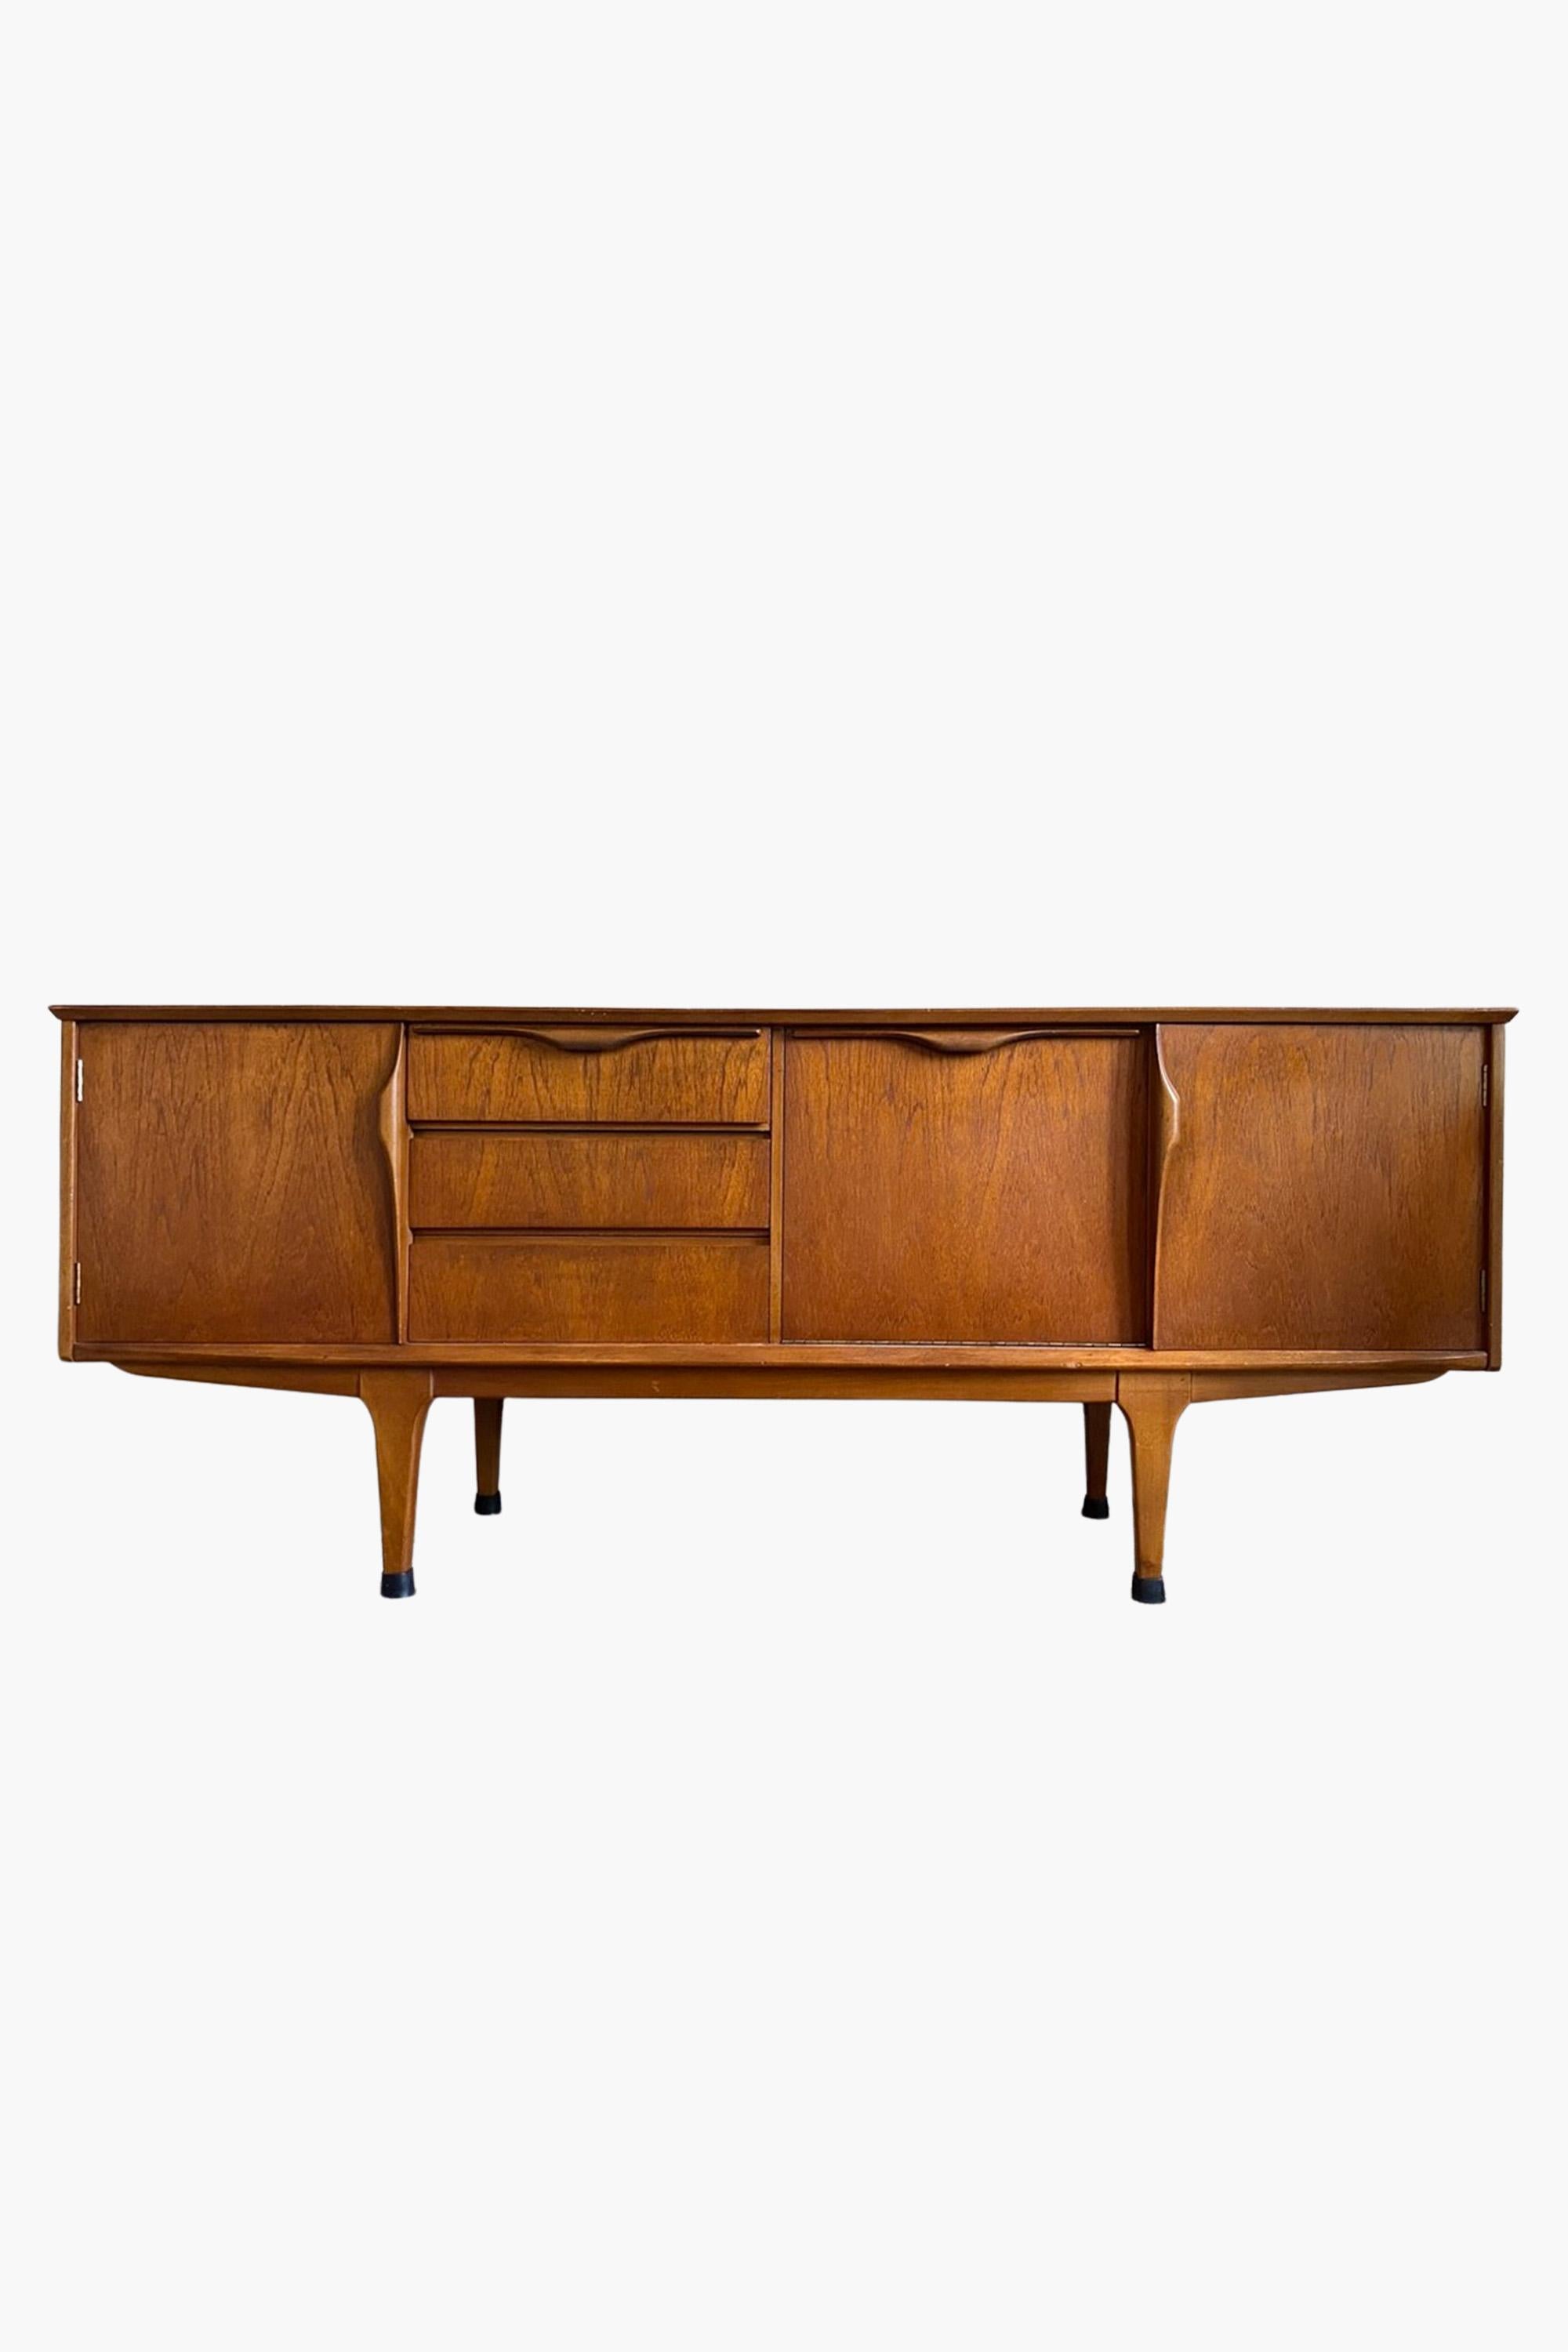 A midcentury teak sideboard by Jentique in excellent original condition.

Jentique designed and manufactured small batches of high quality Danish-inspired furniture in Norfolk in the 1950s and 60s. Their designs were retailed by iconic London